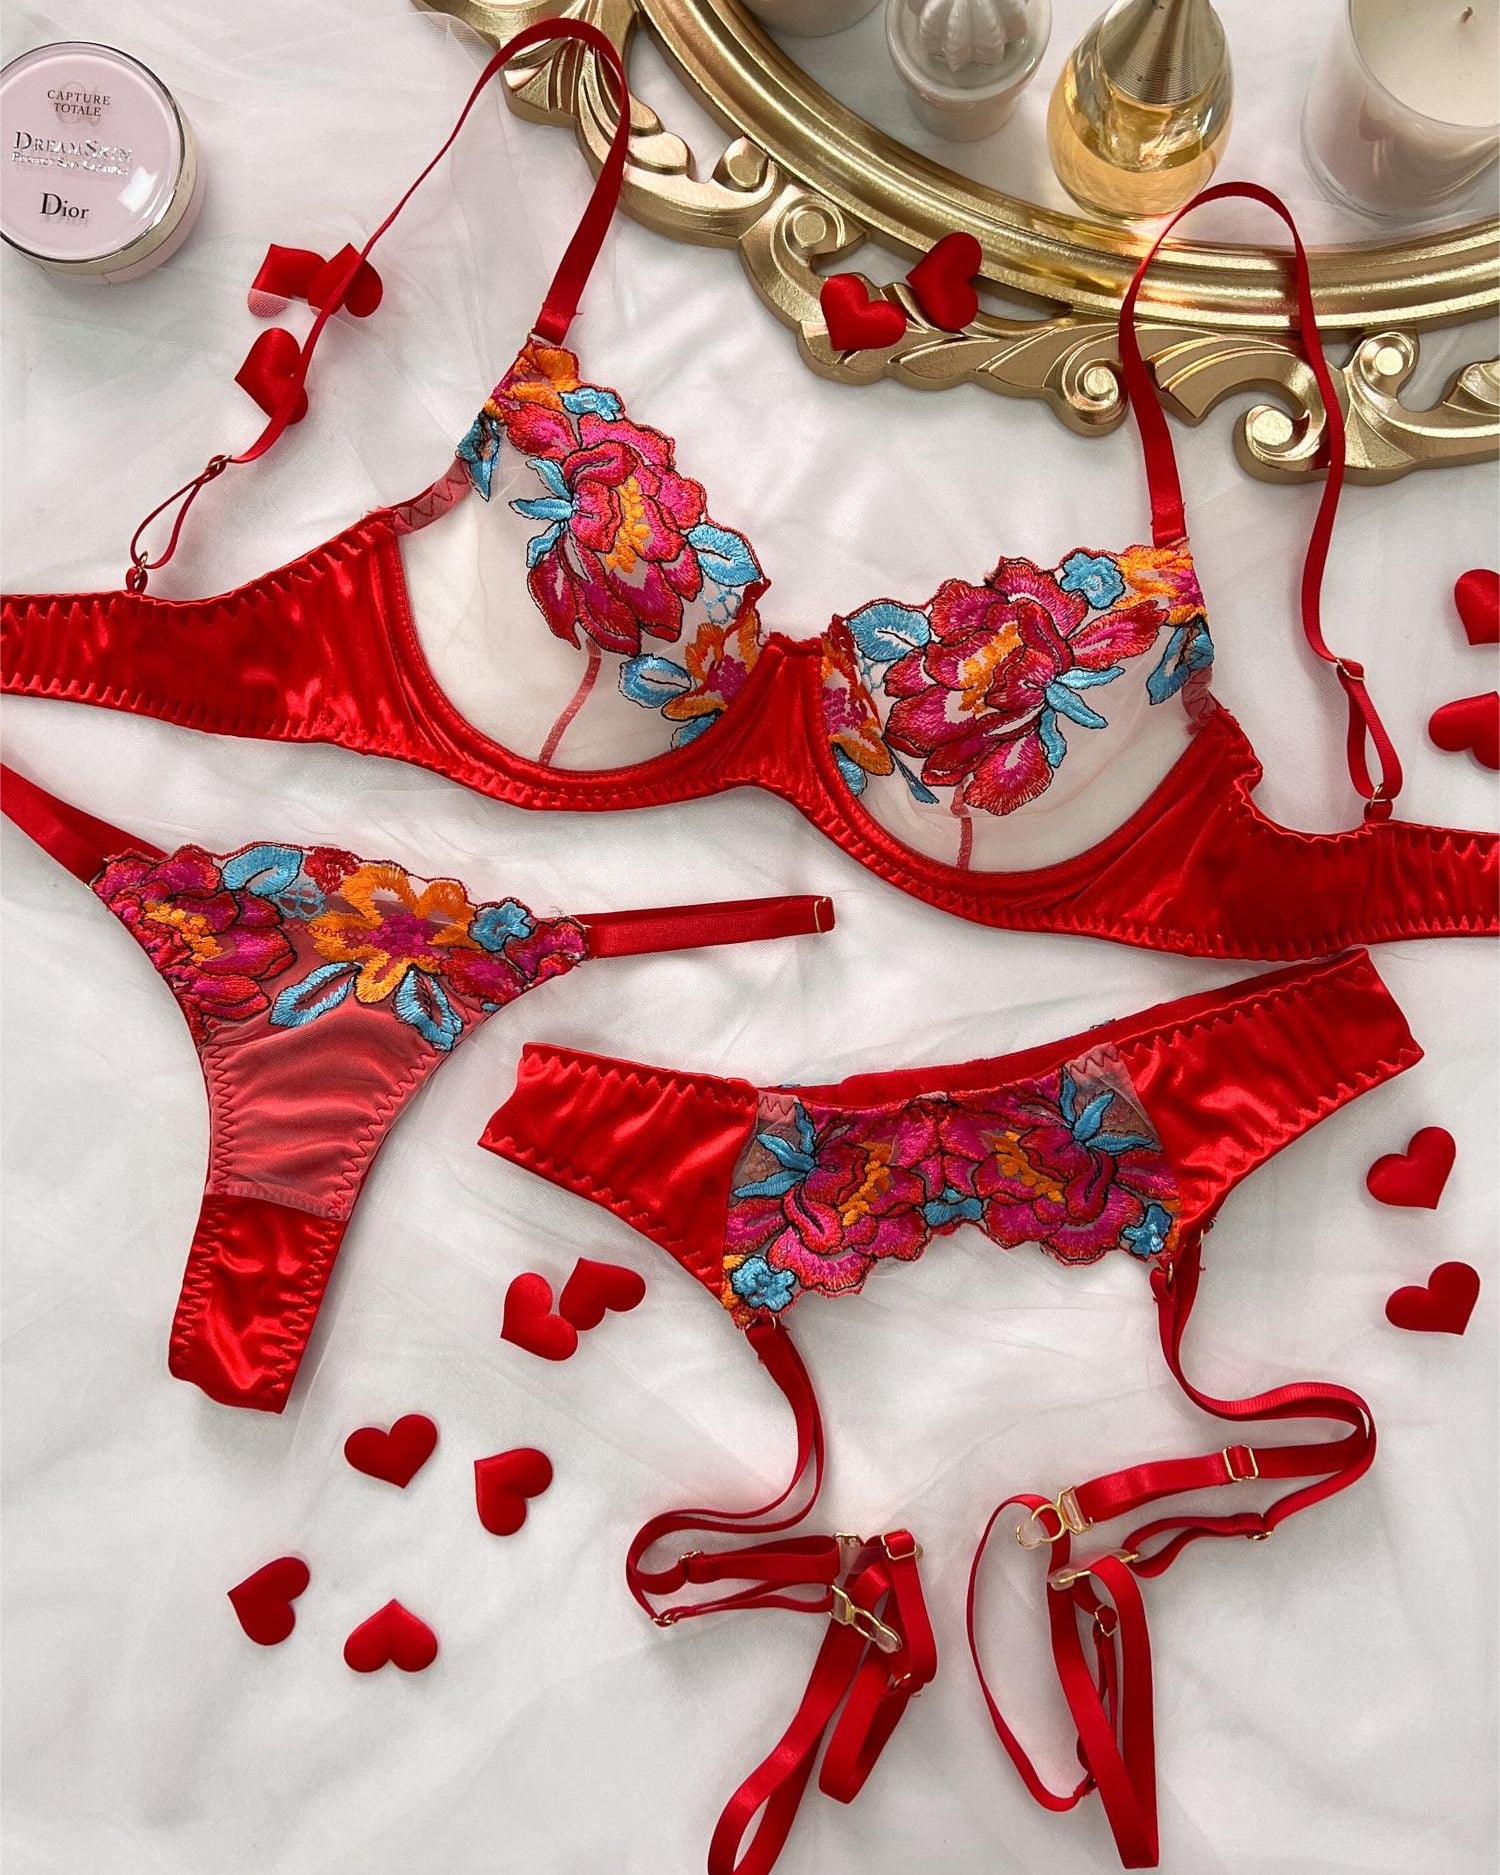 Red / White Satin Floral Embroidery Lingerie Set